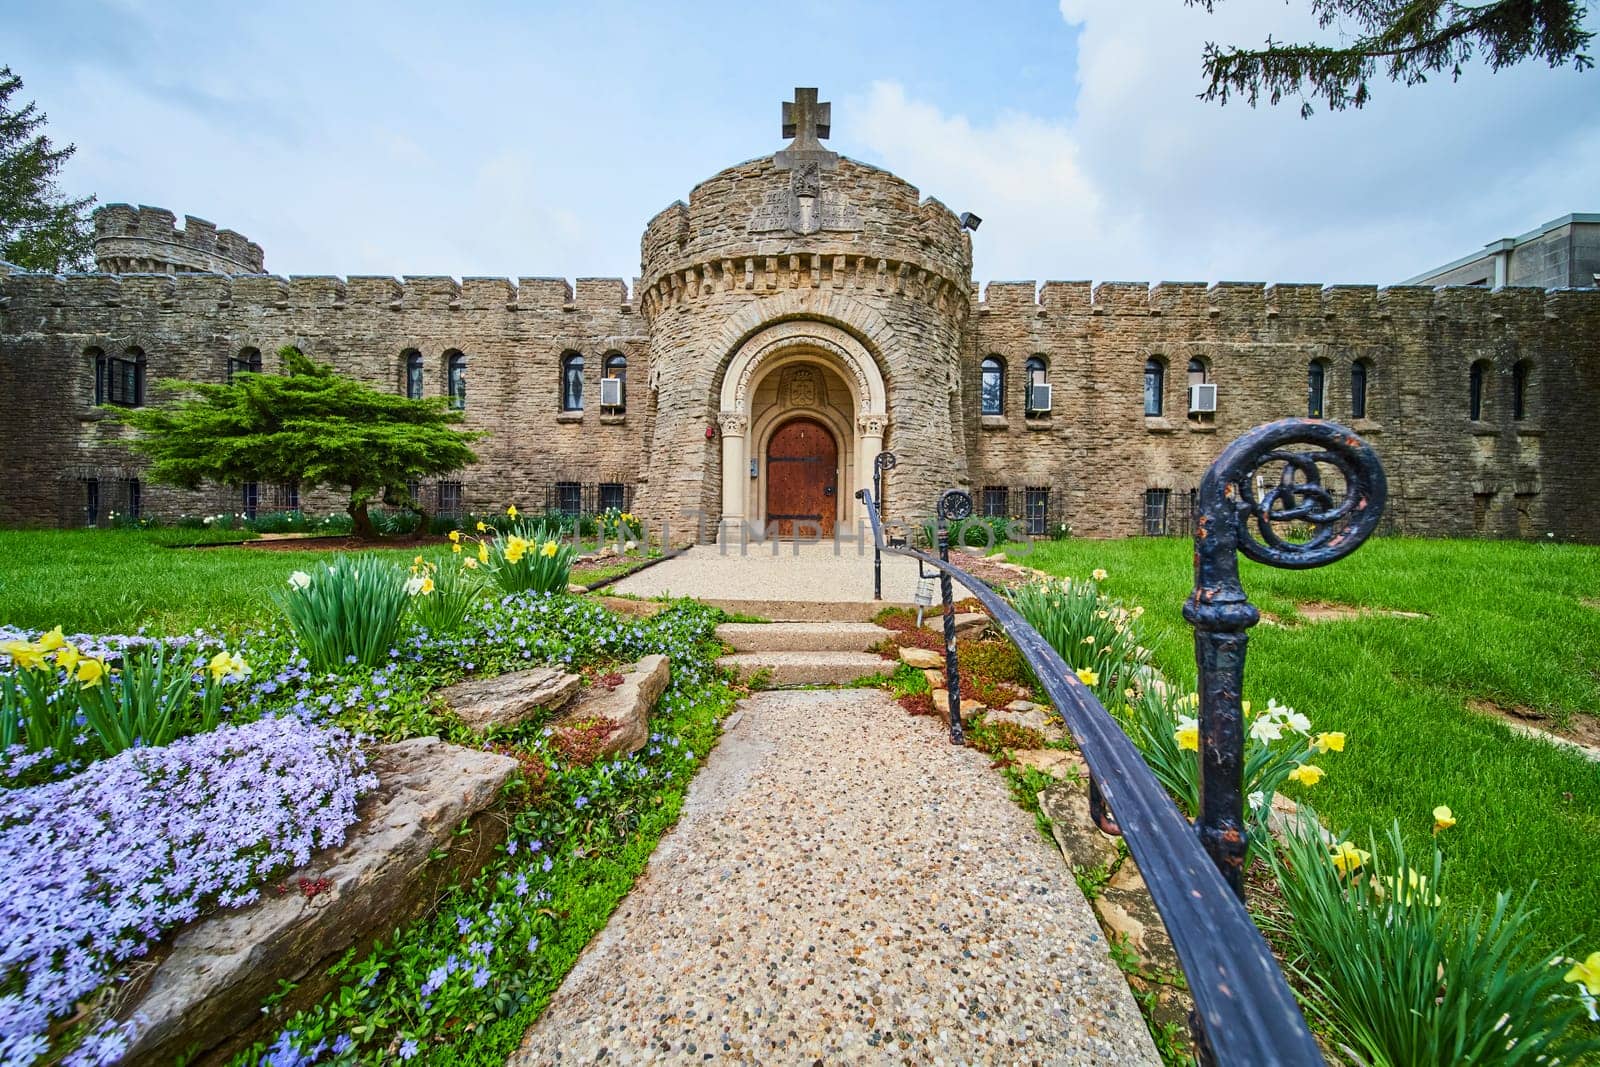 Bishop Simon Brute College, Indiana - A vibrant spring view of a historic castle-like seminary with medieval architecture, along a floral garden path.